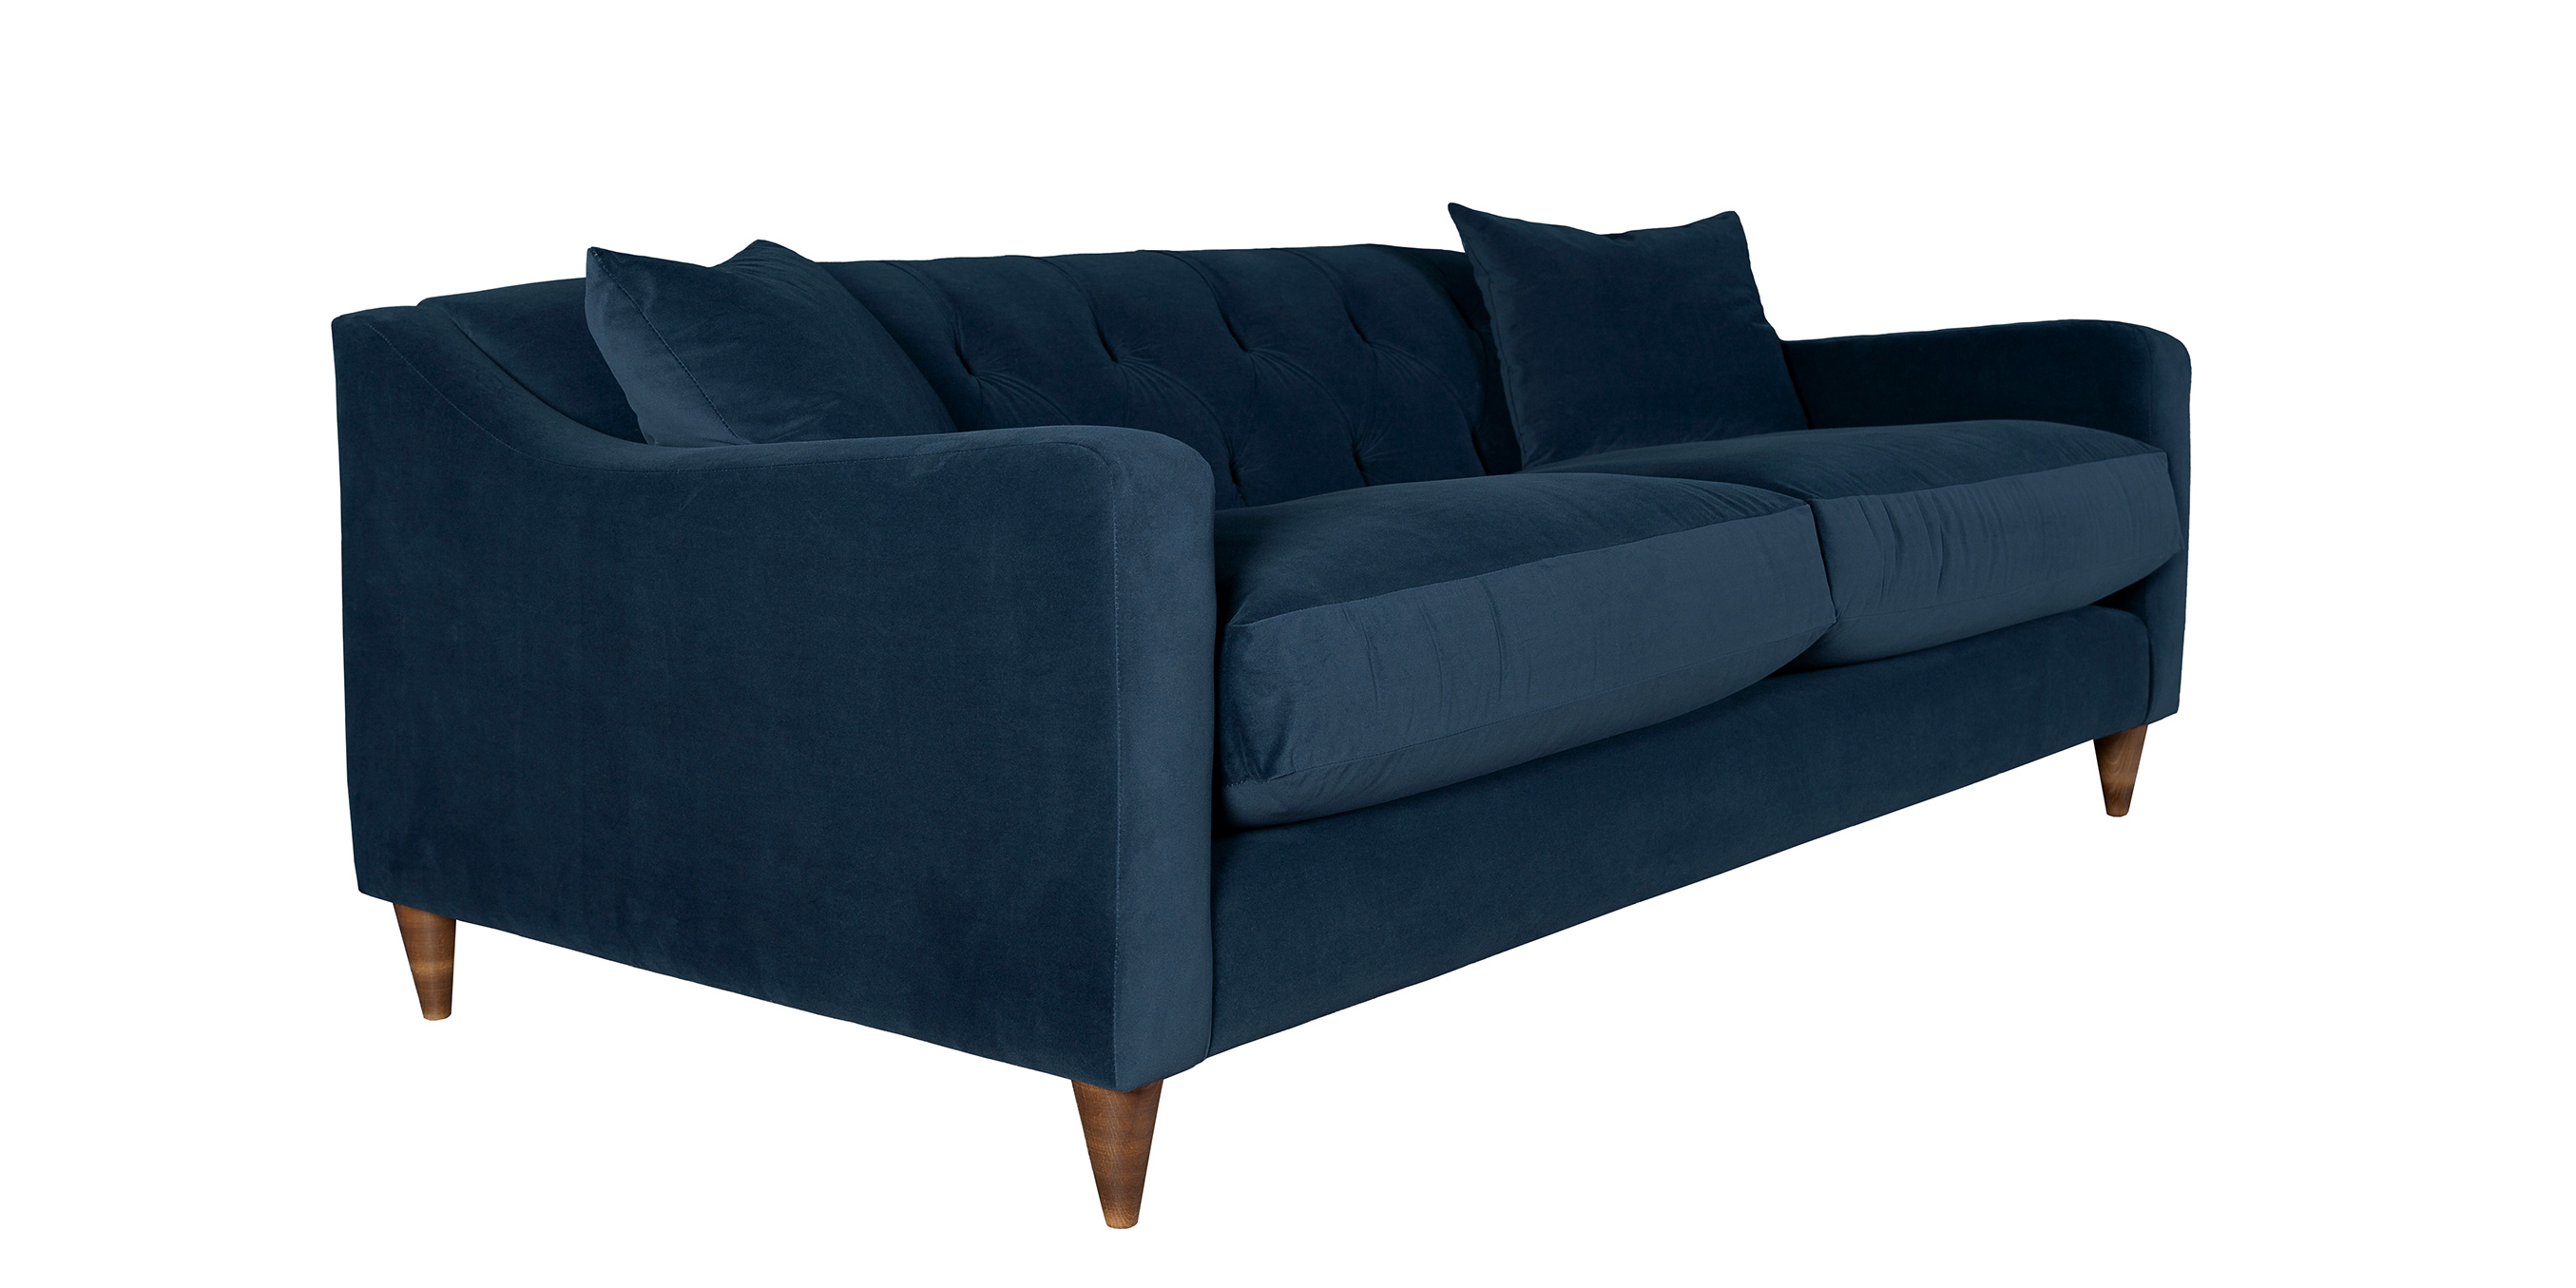 Scarborough sofa available for quick delivery